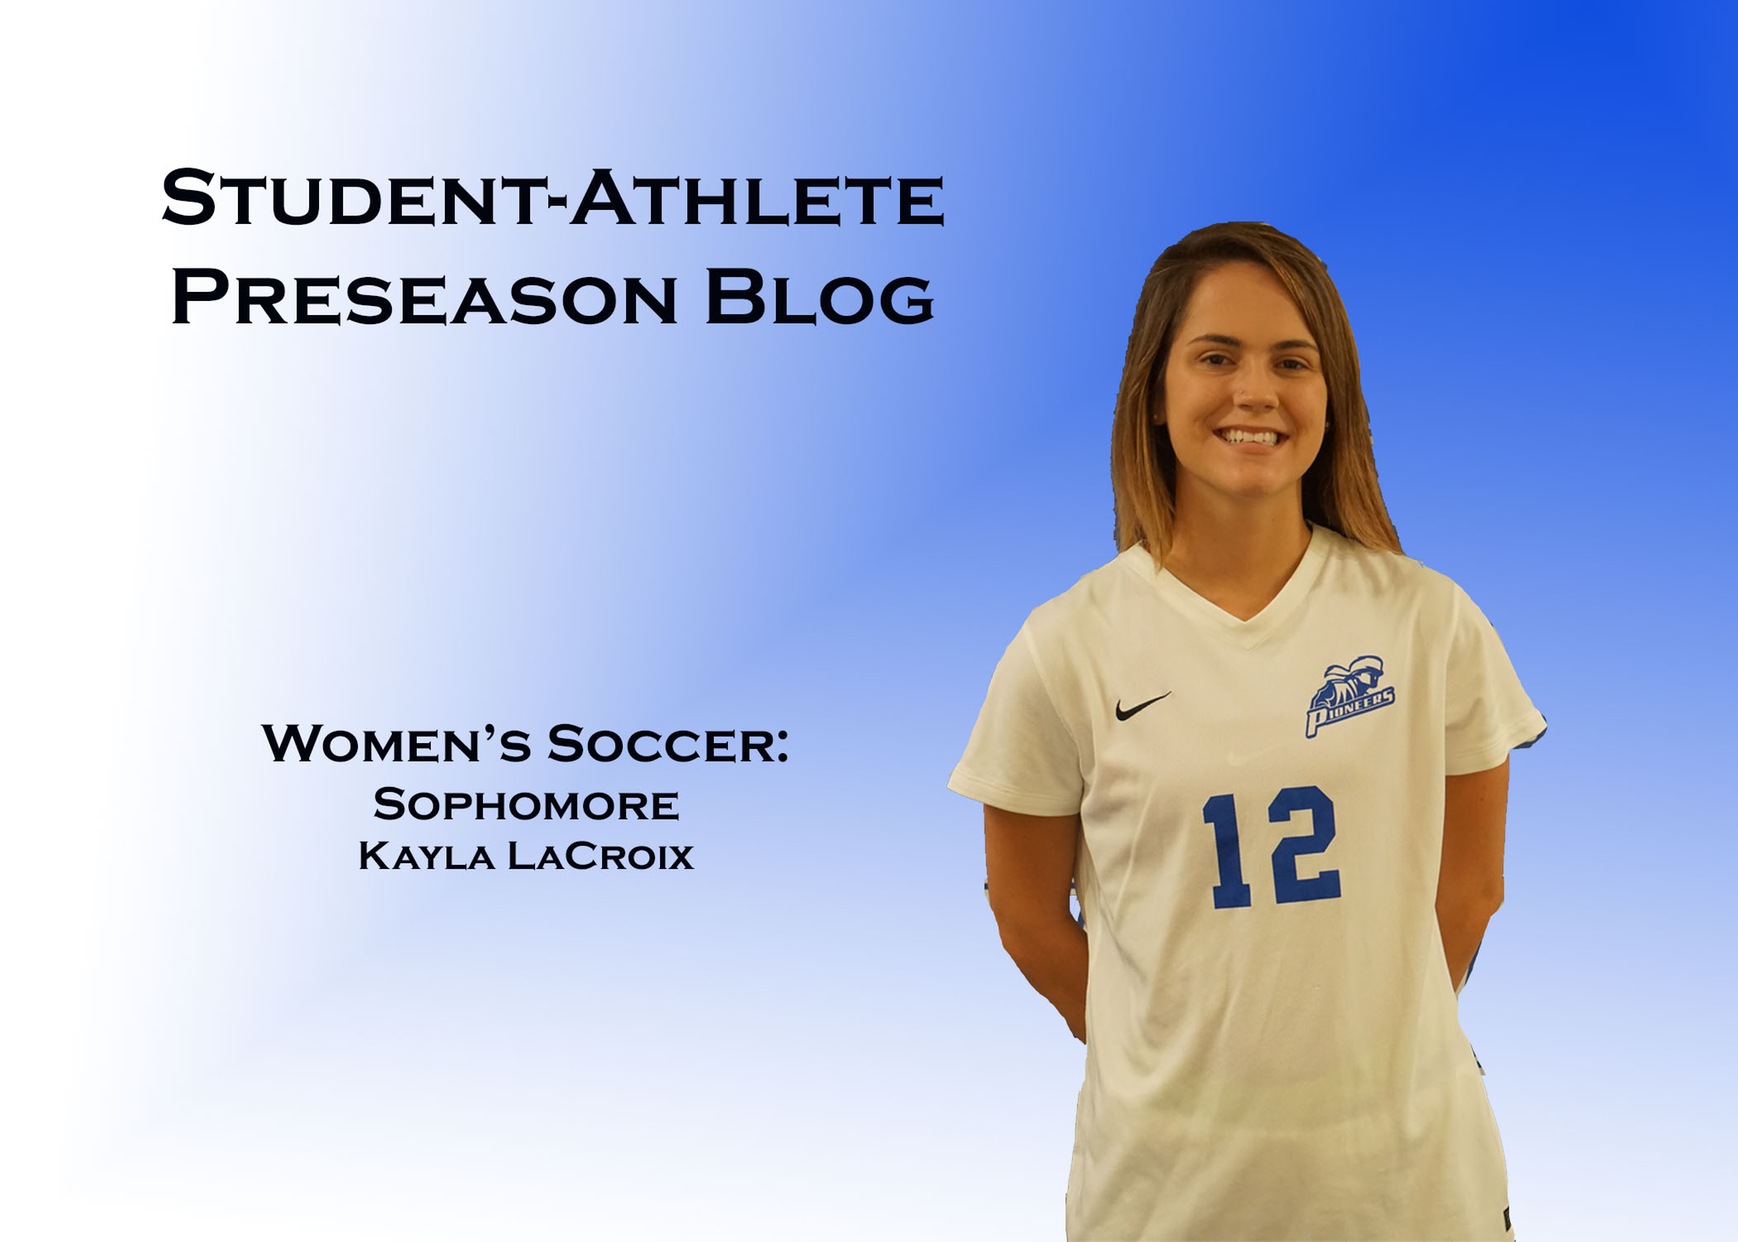 Day Two: Student-Athlete Blog